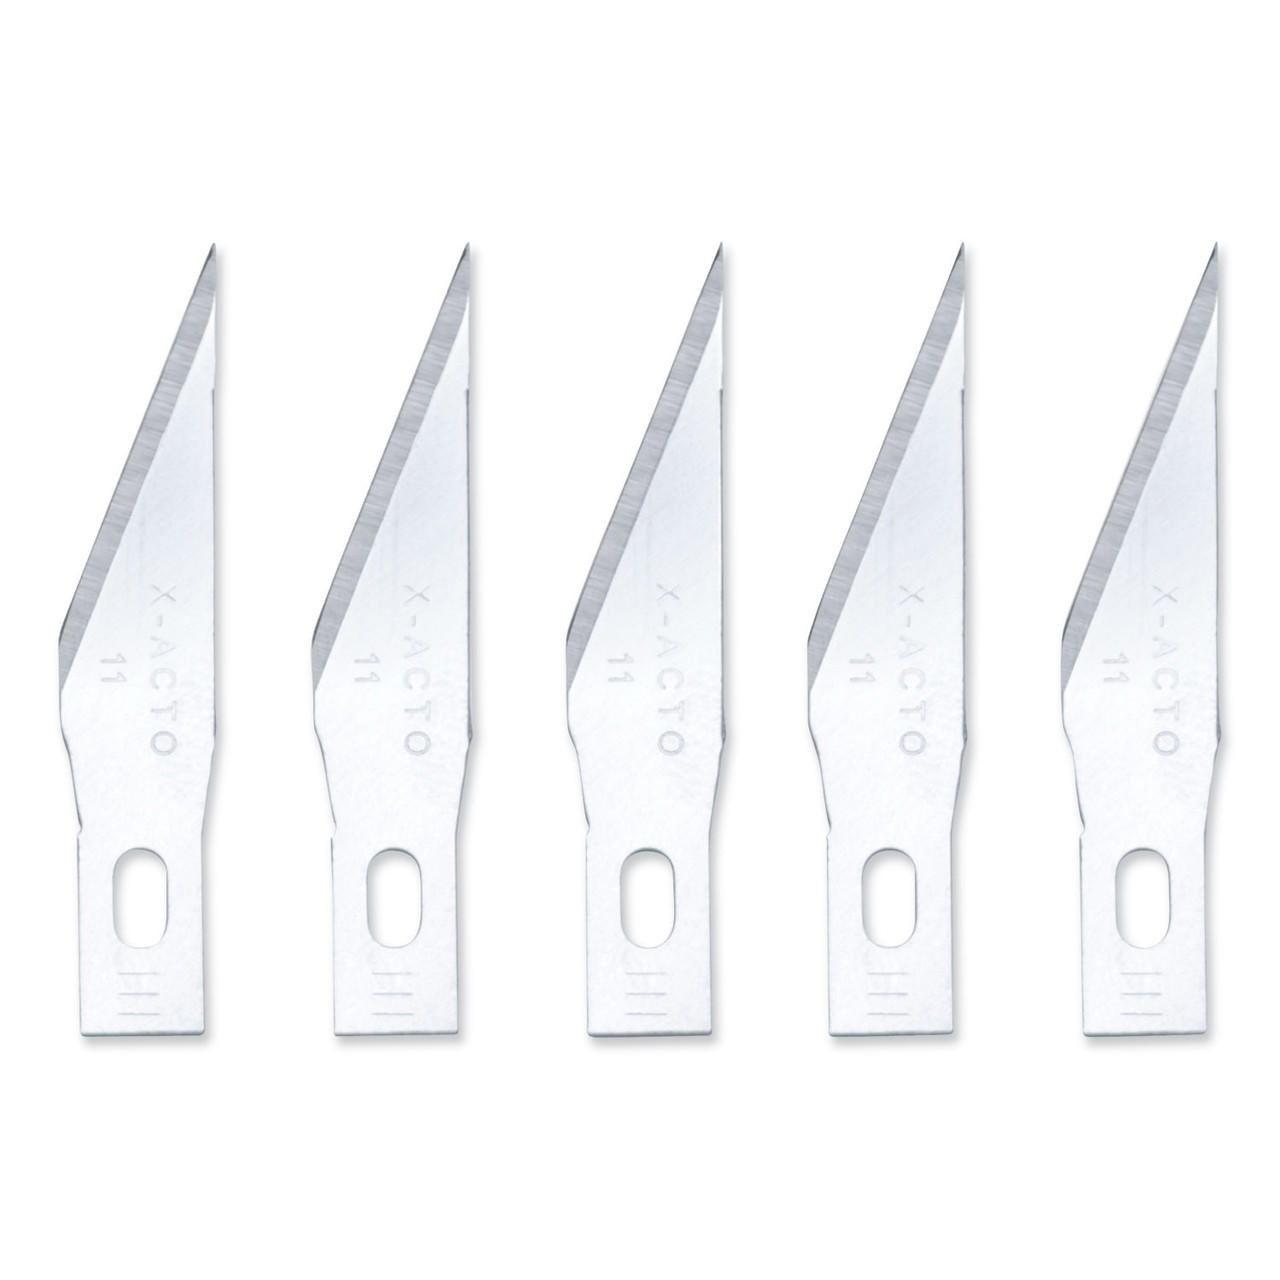 X-Acto Stainless Steel Blades - 5 pack